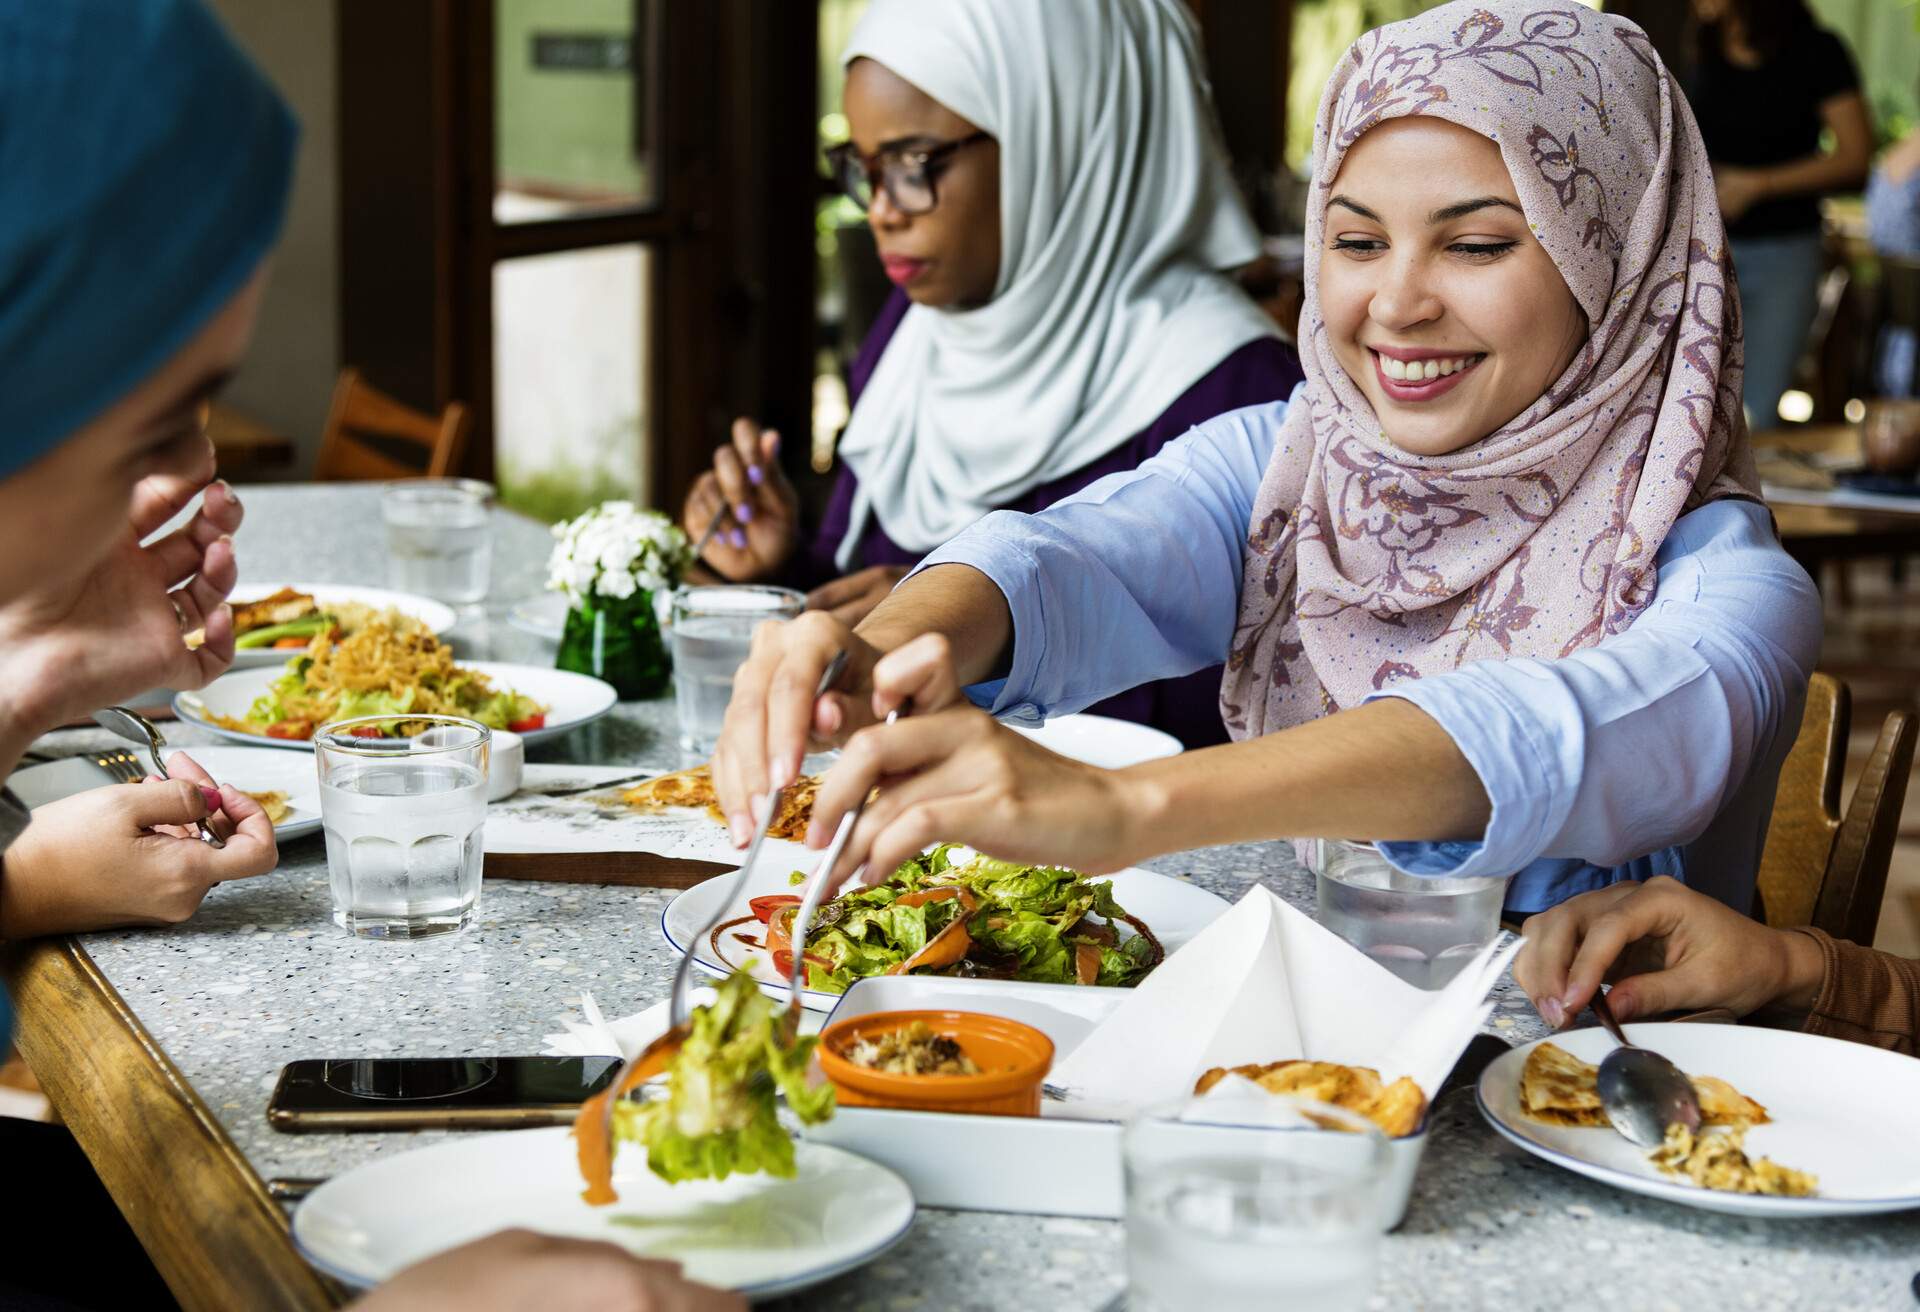 dest_uae_dubai_theme_restaurant_food_people_friends_gettyimages-1040288342_universal_within-usage-period_85218